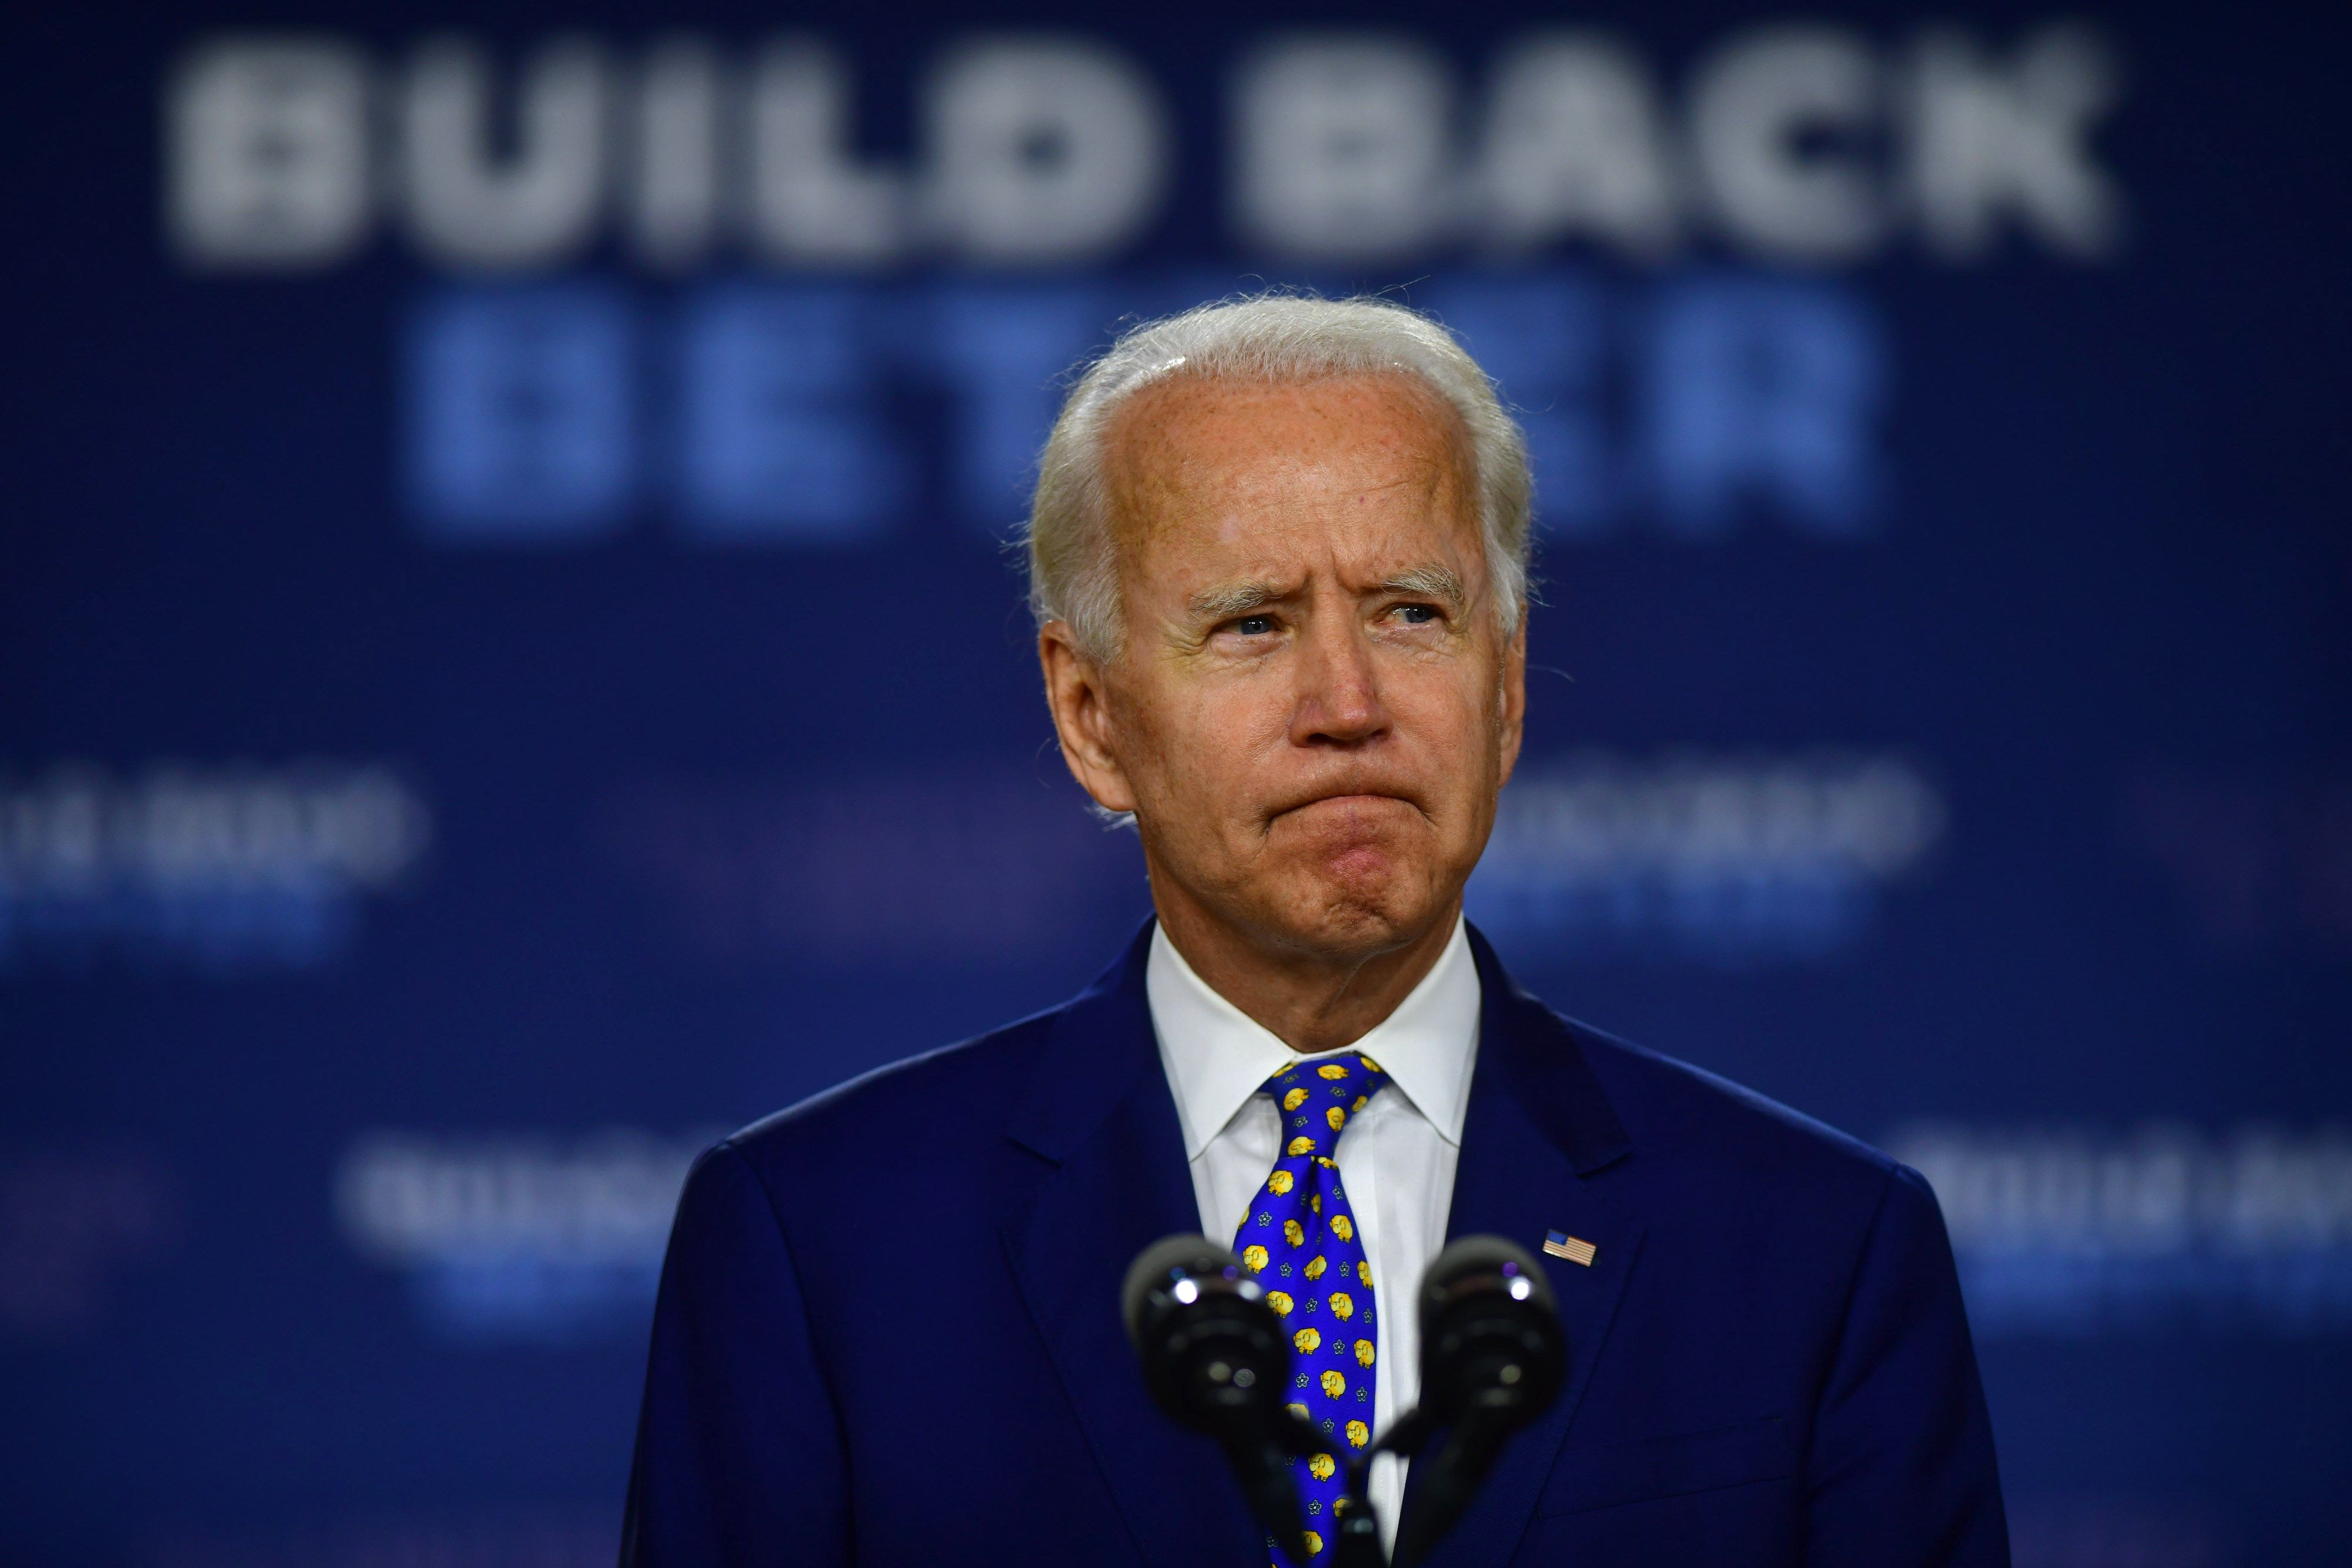 Joe Biden delivers a speech at the William Hicks Anderson Community Centre, on July 28, 2020, in Wilmington, Delaware. Photo: Getty Images / AFP